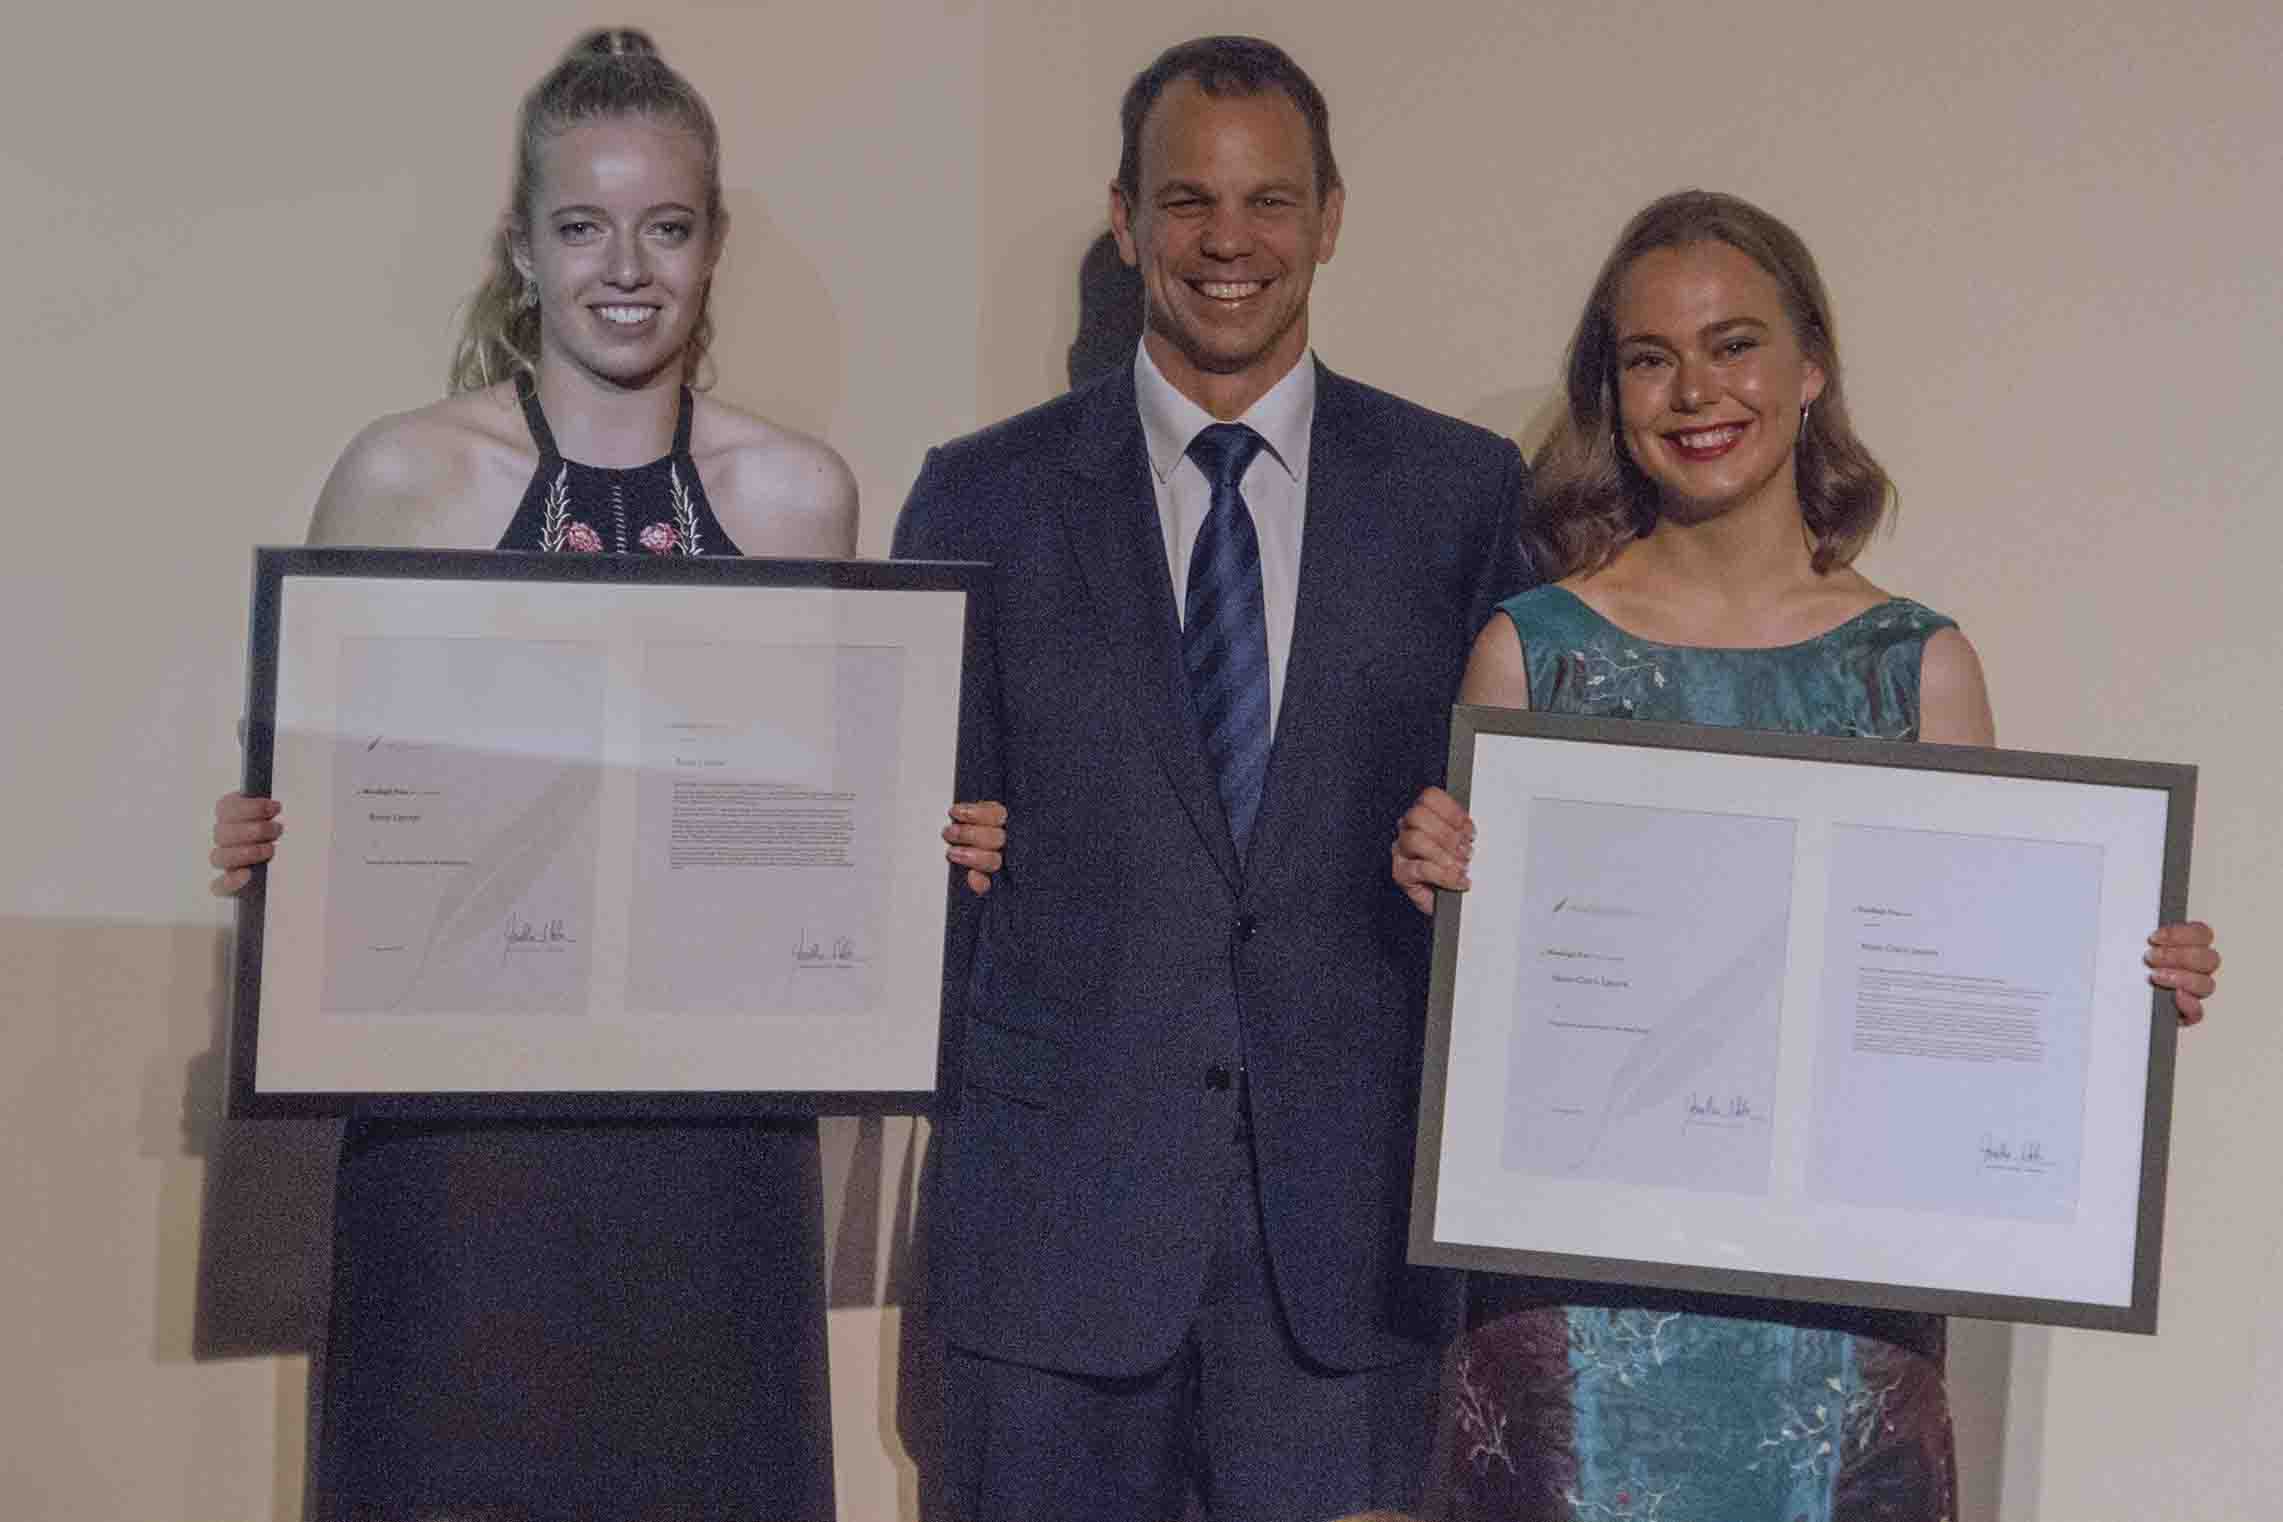 The 2016 Woodleigh Prize Winners Romy Lipszyc, left, and Nixie-Claire Lepore, right, with Woodleigh School Principal Jonathan Walter.